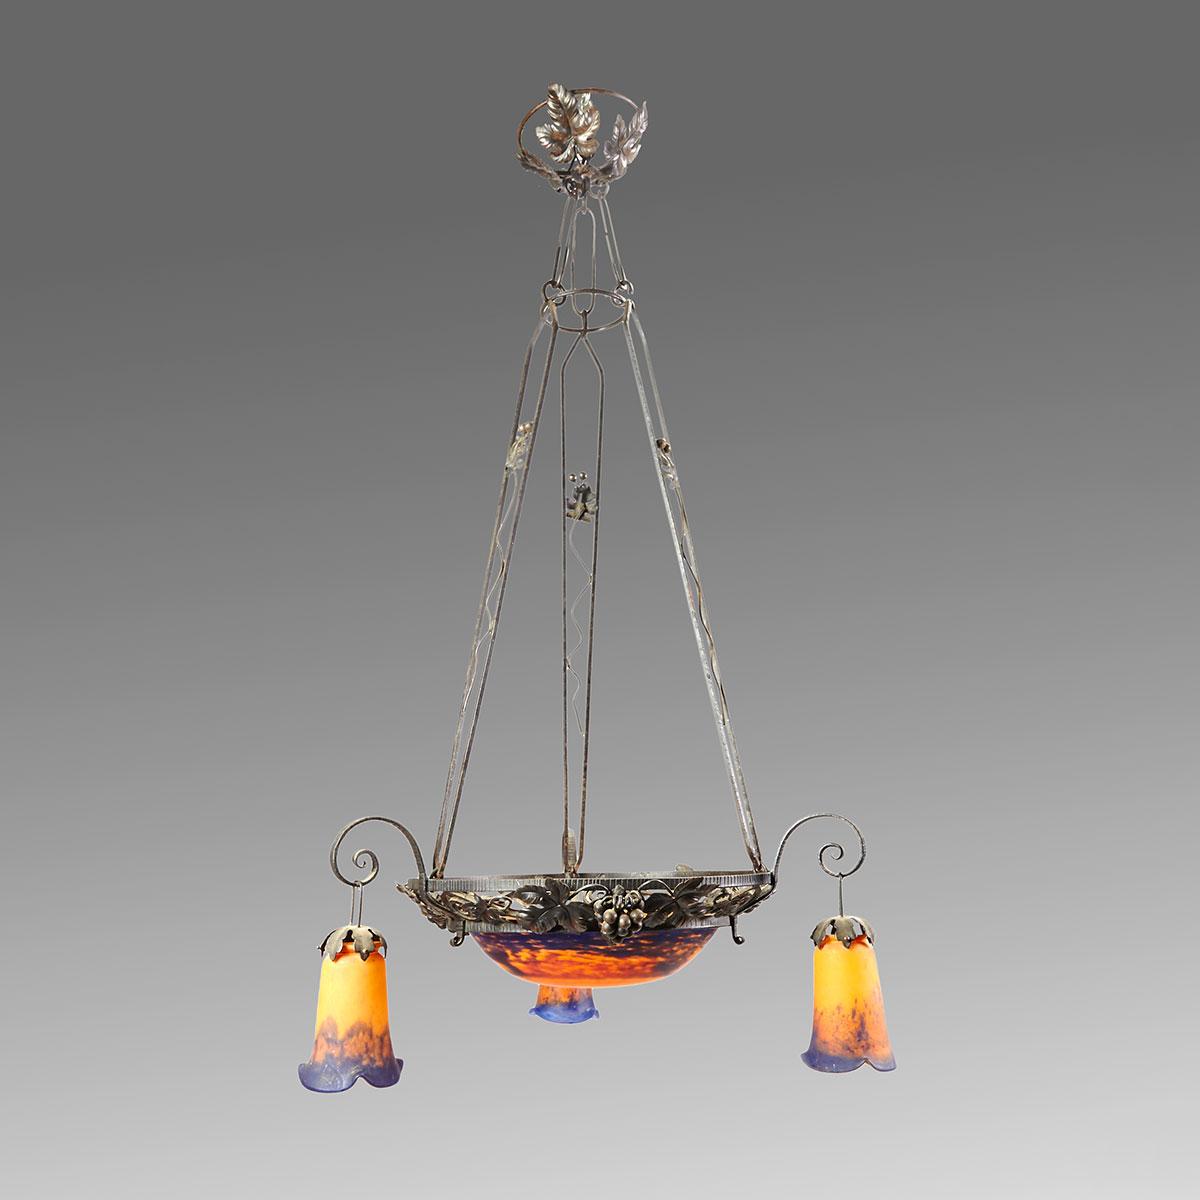 French Art Deco Wrought Iron and Glass Chandelier, mid 20th century